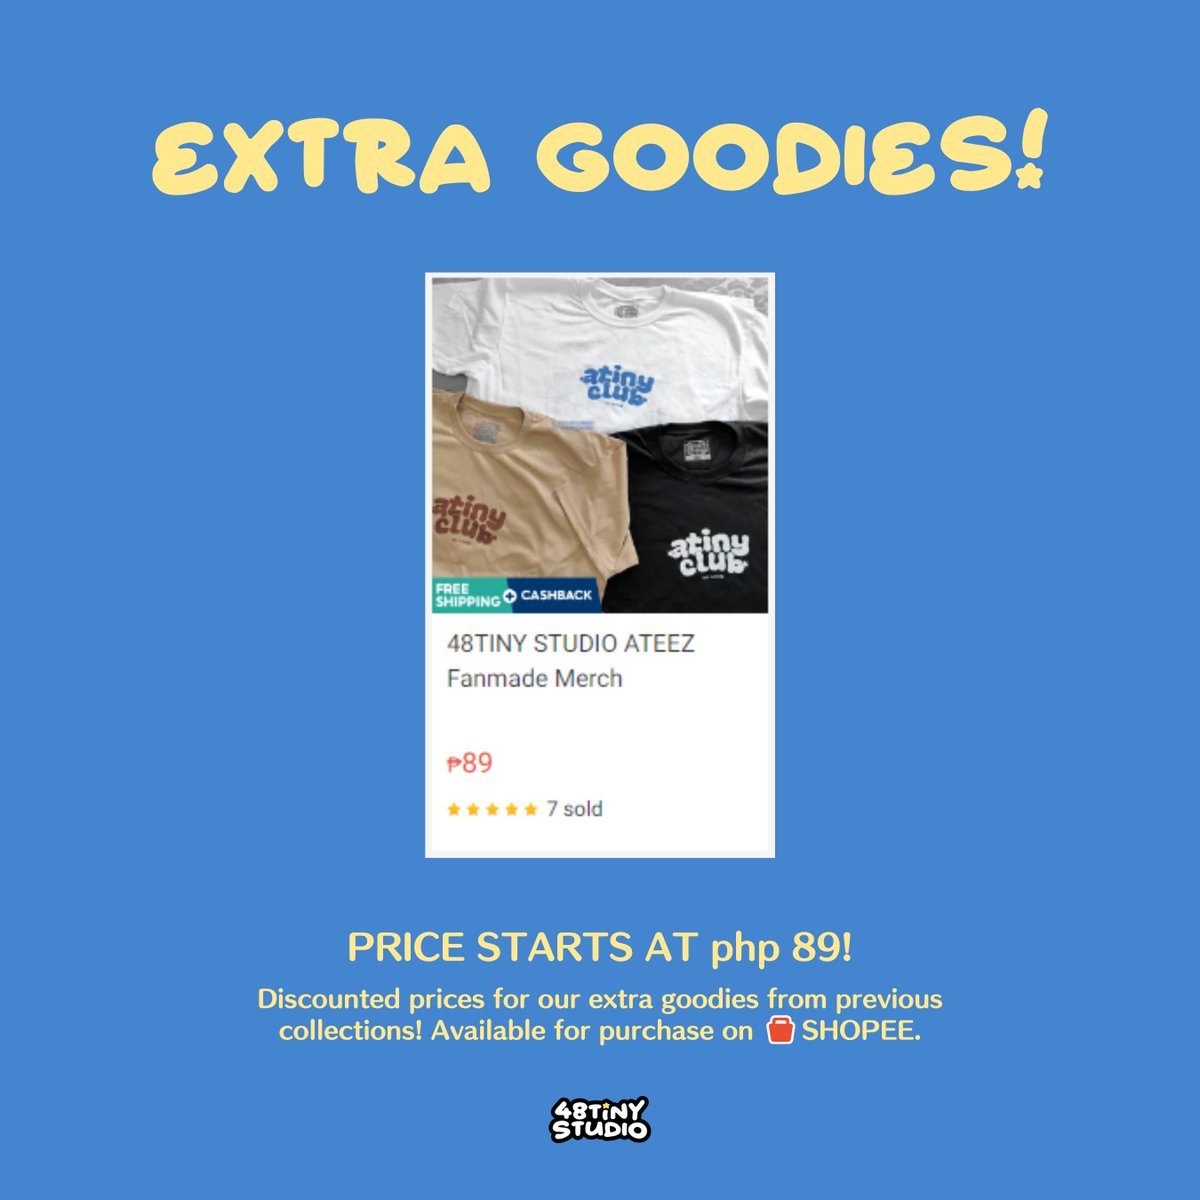 Our extra goodies are back on Shopee! 🛍️ You may purchase them with your available vouchers with our discounted prices! ⭐️ Shirts, caps, keycharms and stickers, all available! 🛒 shopee.ph/48tinystudio